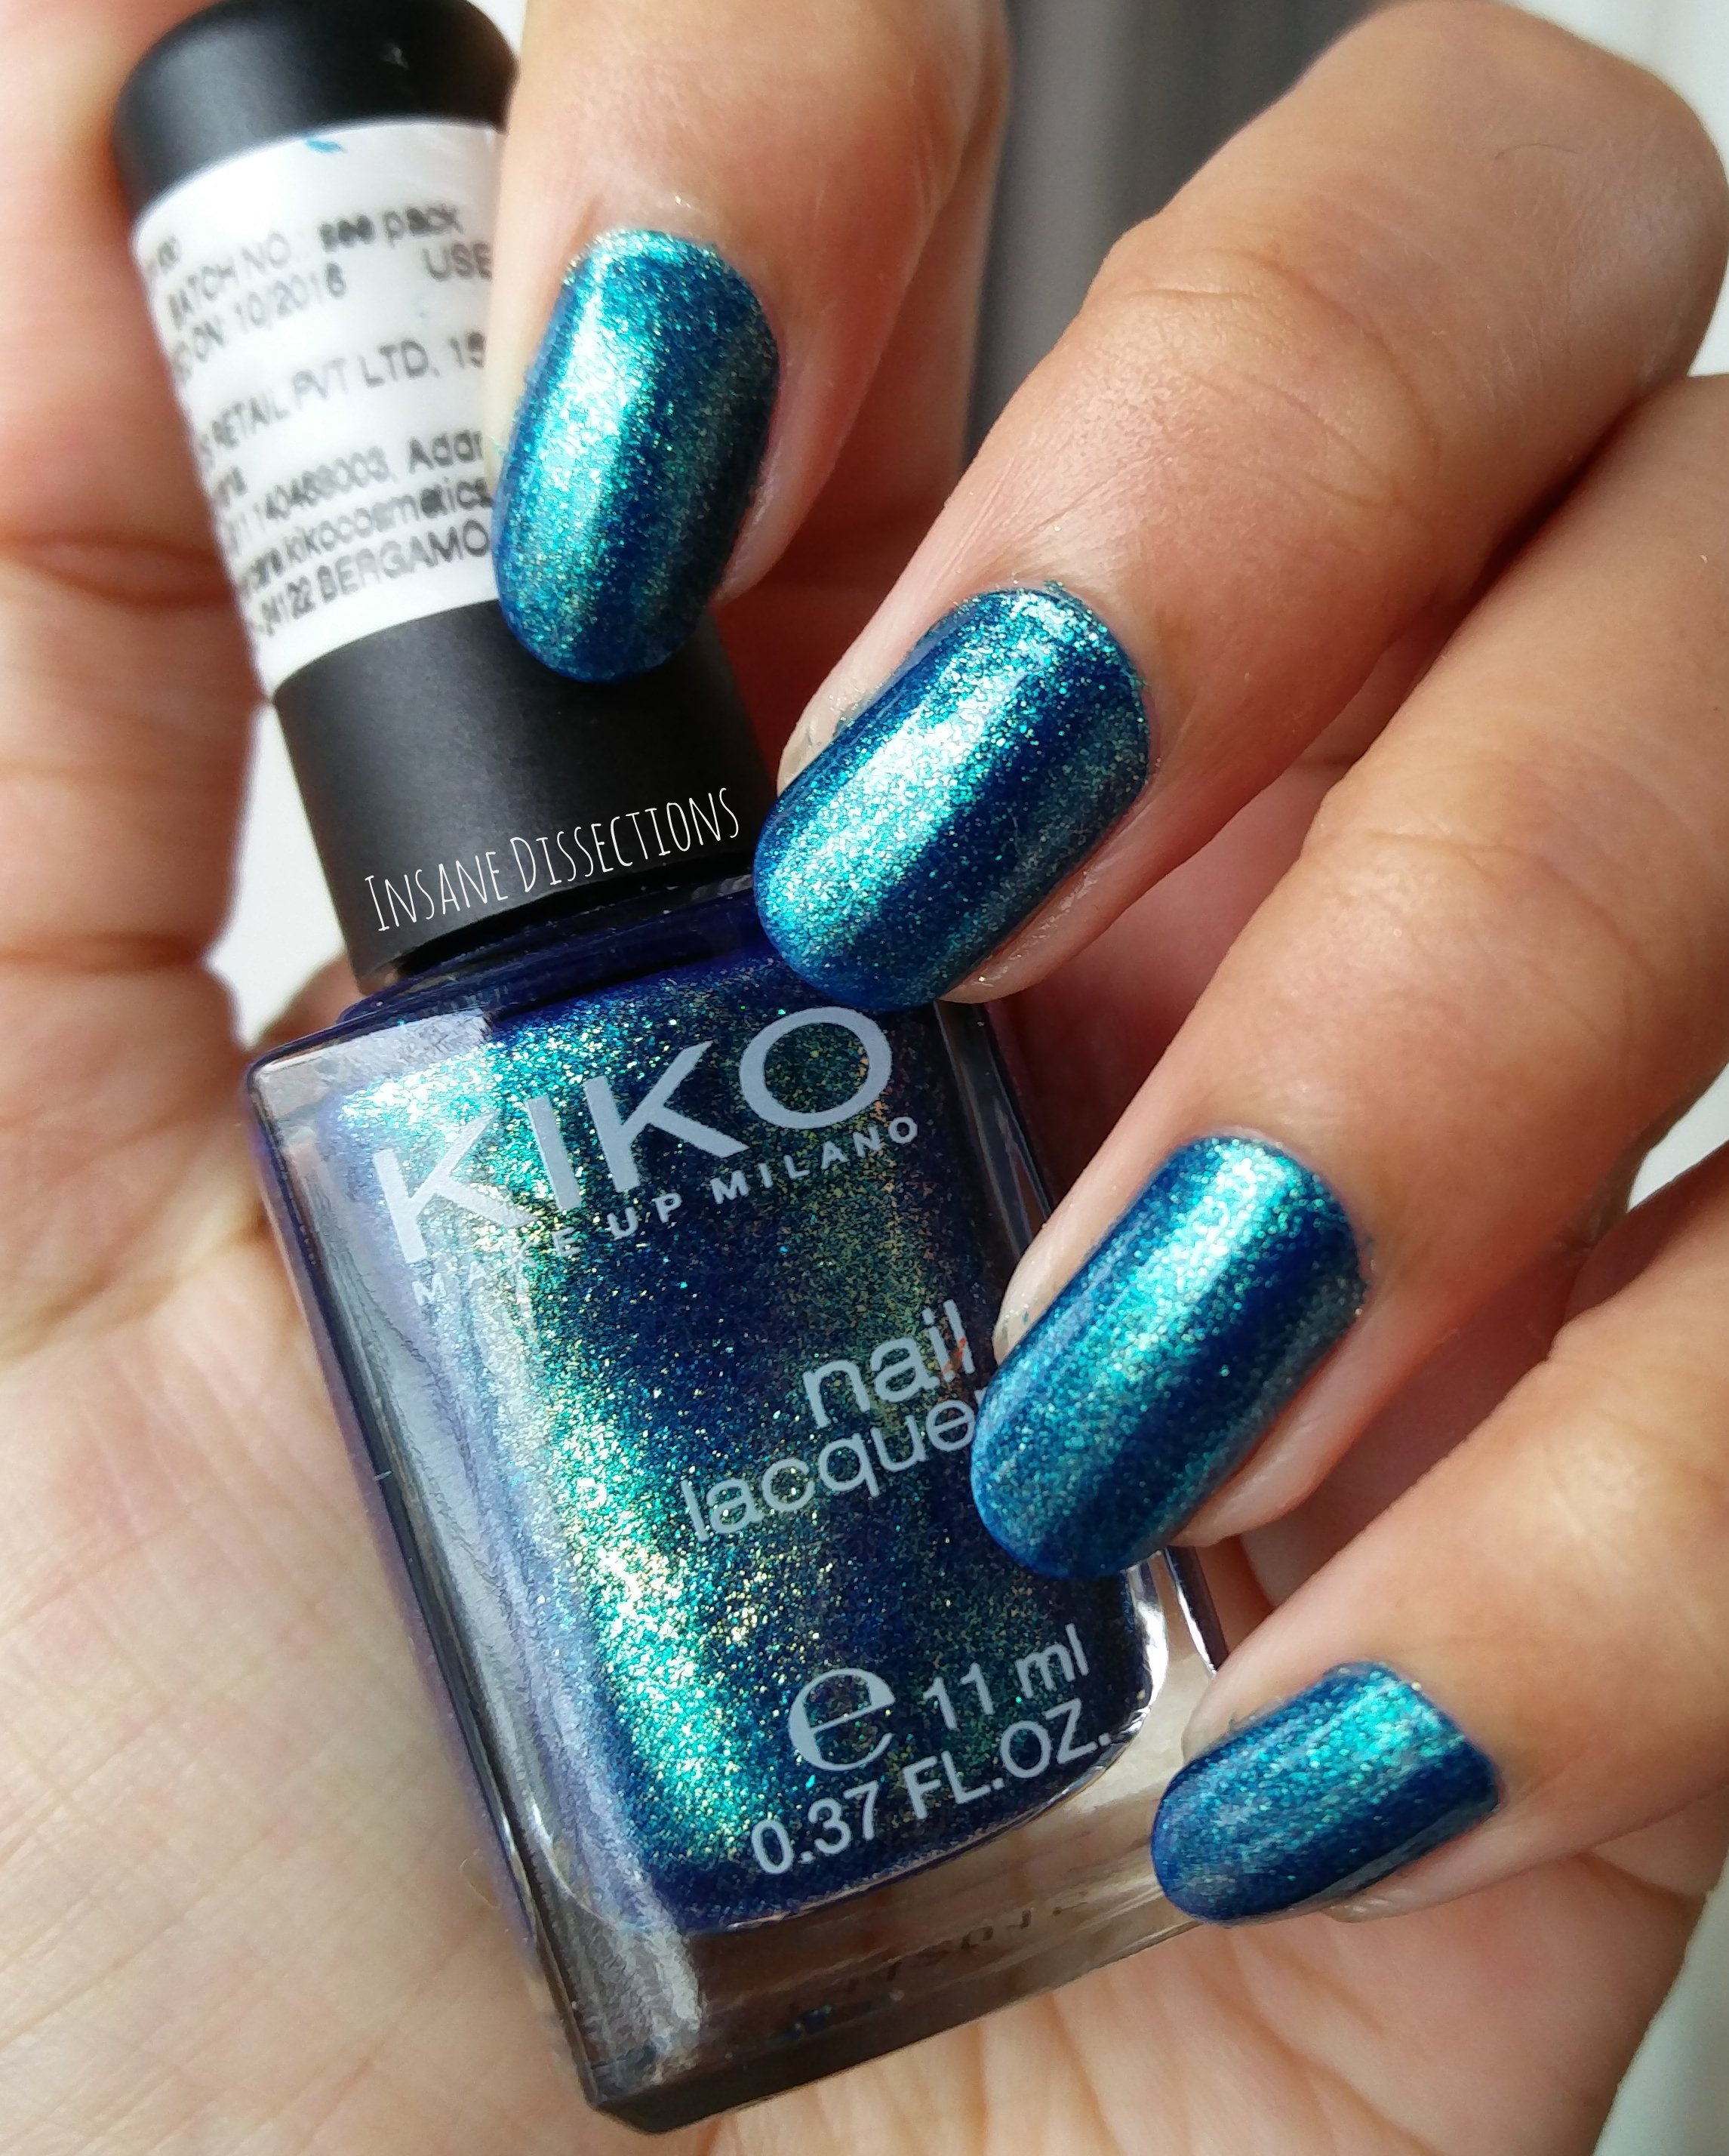 KIKO 335 - gorgeous royal blue jelly - Review and swatches - Lucy's Stash